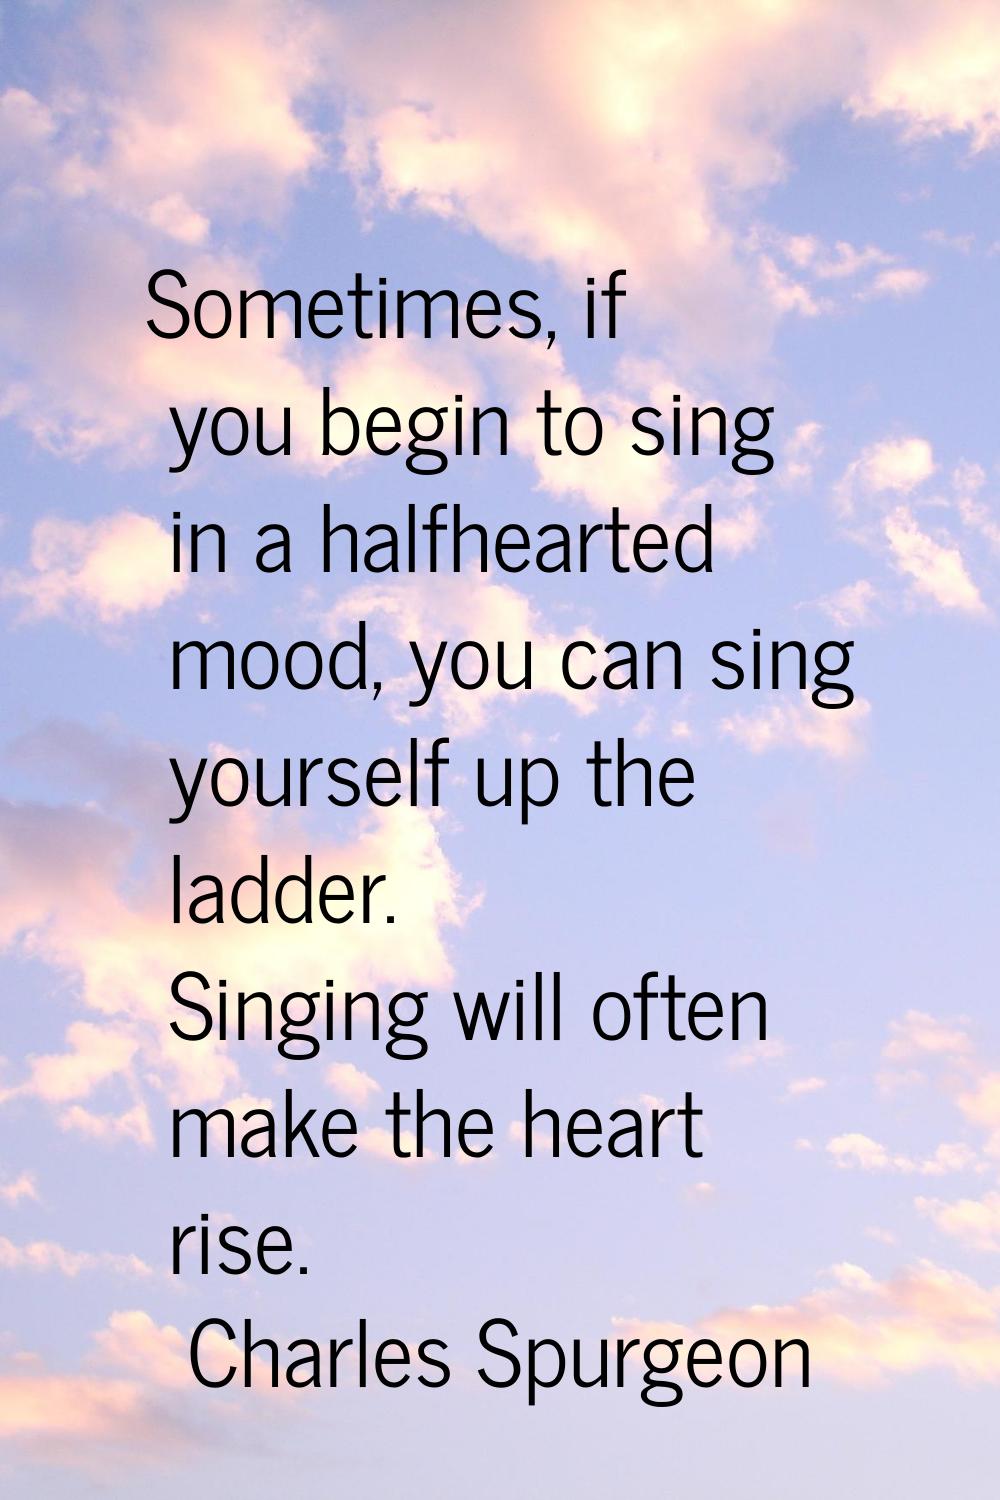 Sometimes, if you begin to sing in a halfhearted mood, you can sing yourself up the ladder. Singing